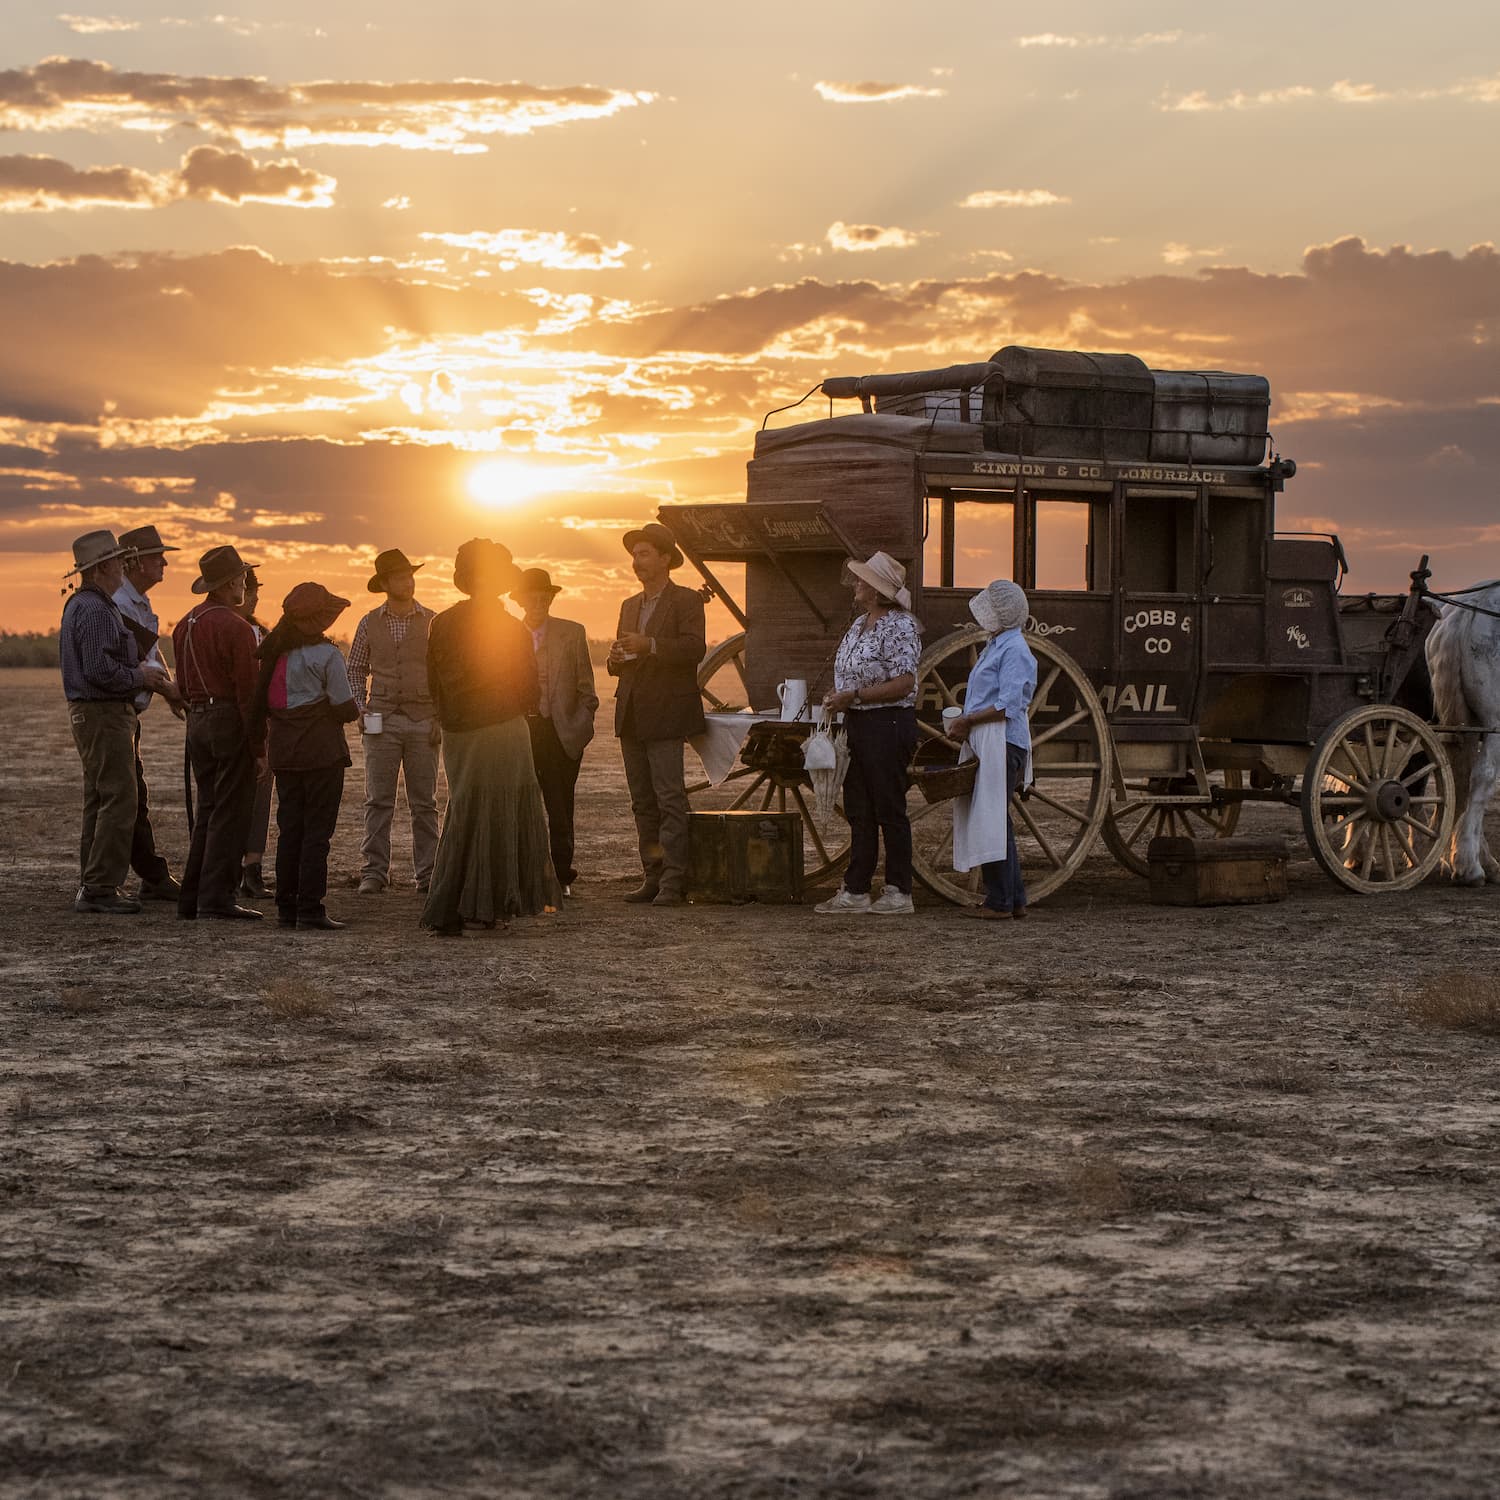 As sun sets behind the Stagecoach, 10 tour guests gather and listen to stories